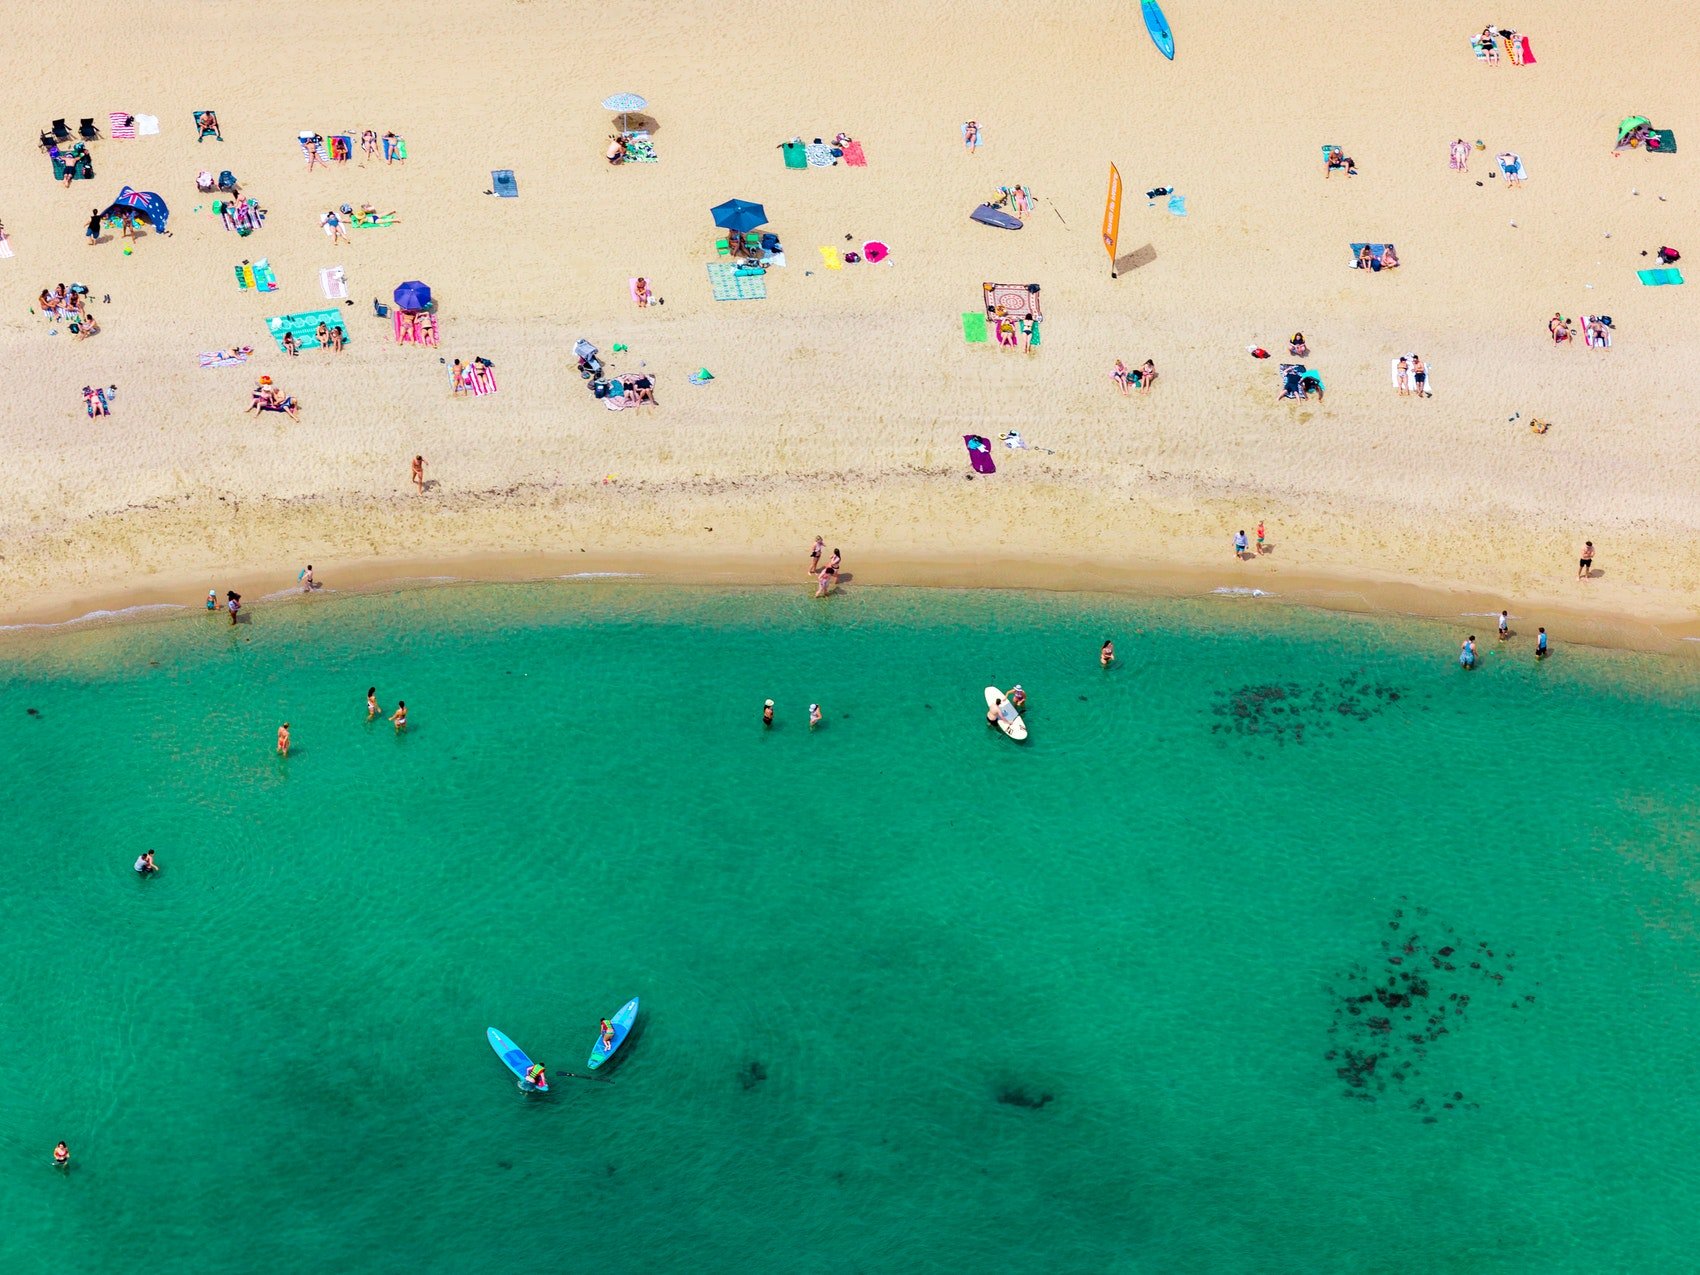 'Melbourne Summer' (print) by Penny Prangnell. An aerial fine art print of a beach with sunbathers and surfers.